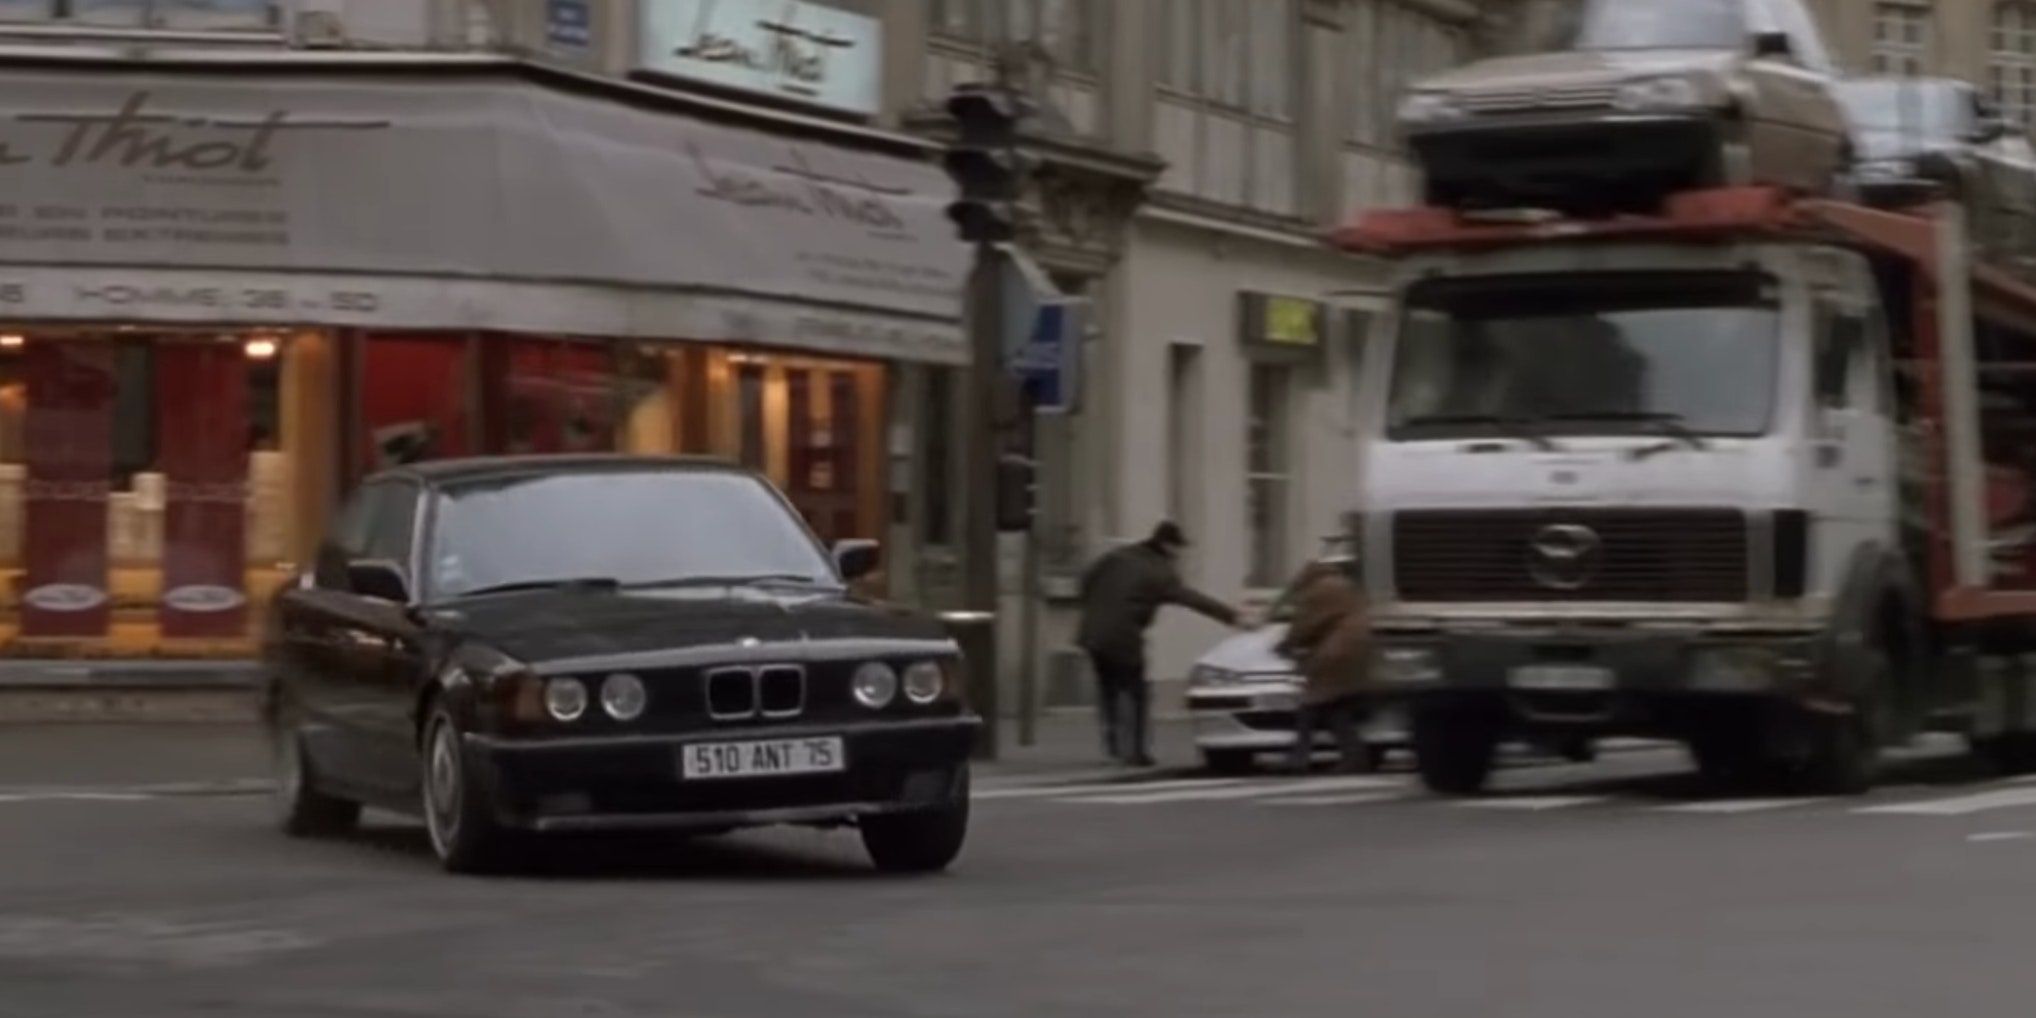 The Paris chase in Ronin